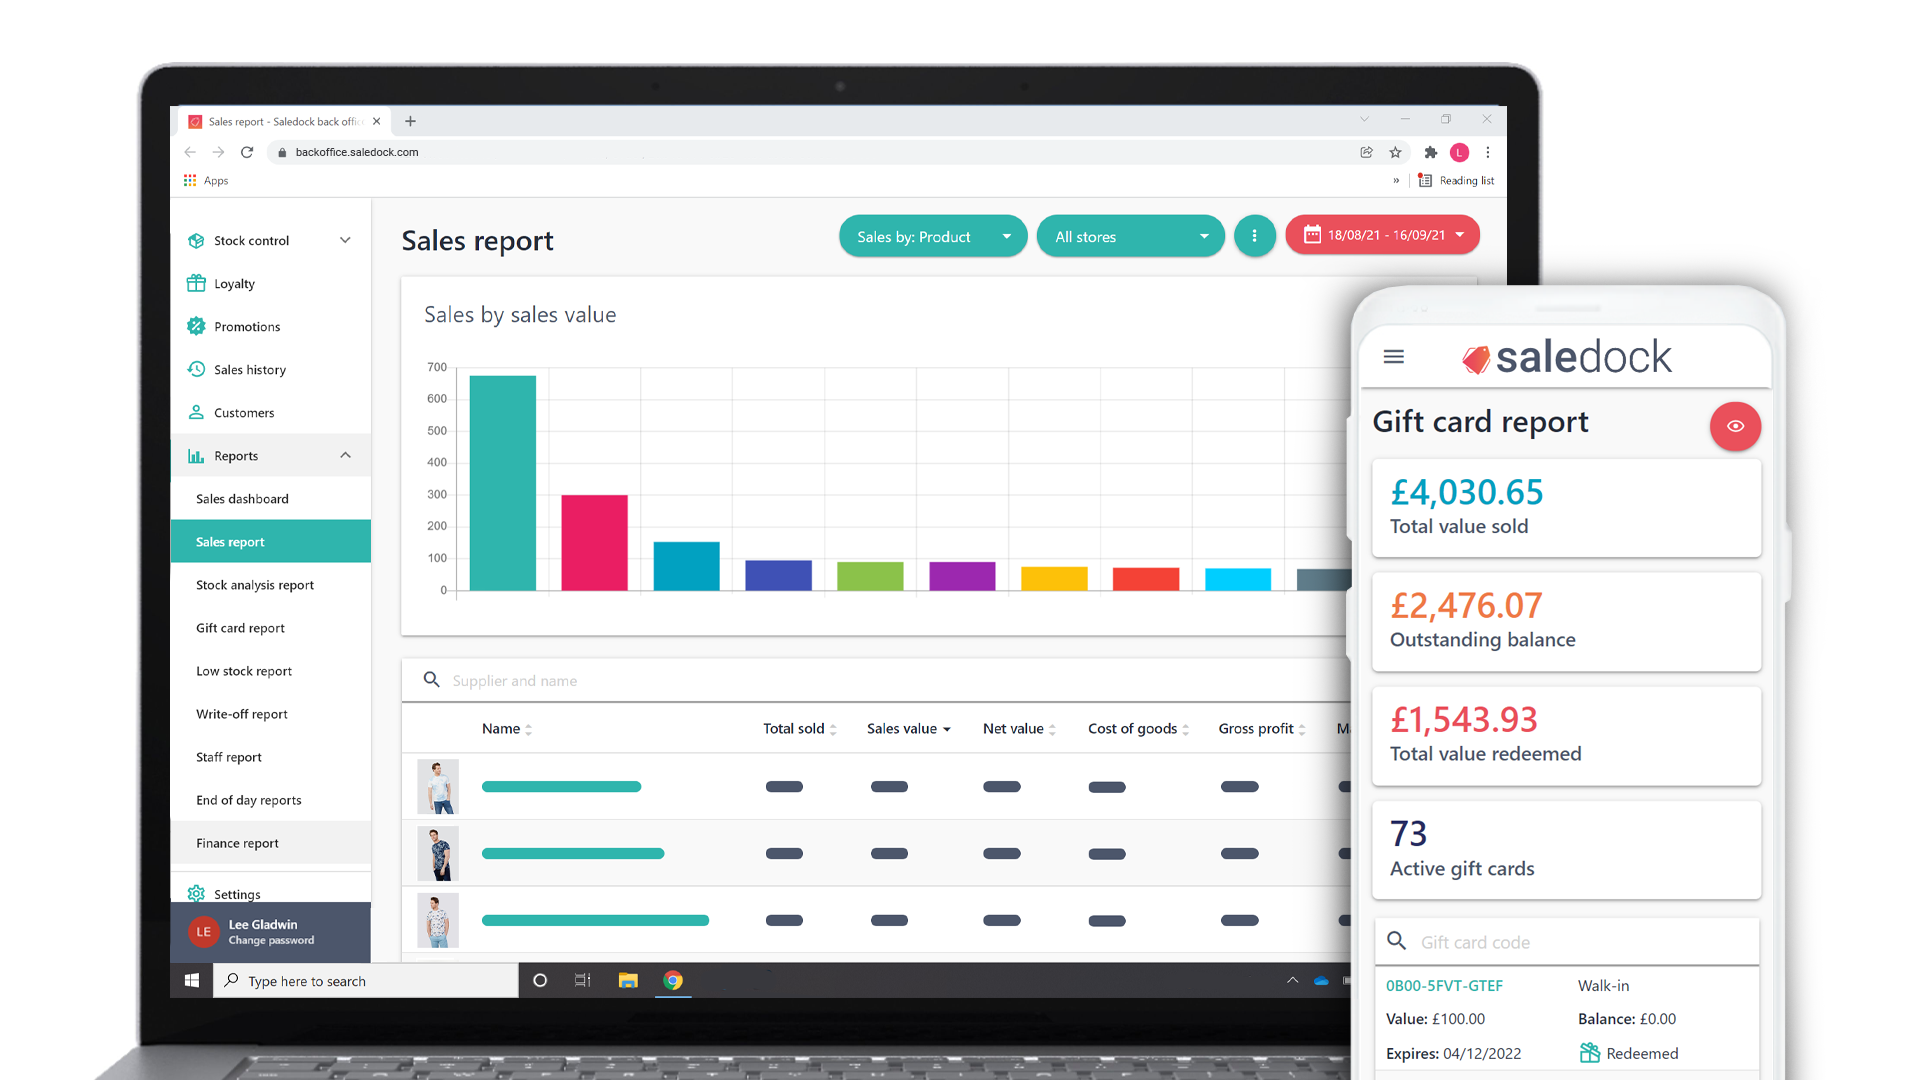 Saledock Software - Saledock reports - Understand your business better with real-time analytics. From performance reports and stock analysis reports to gift card reports and end of day reports.